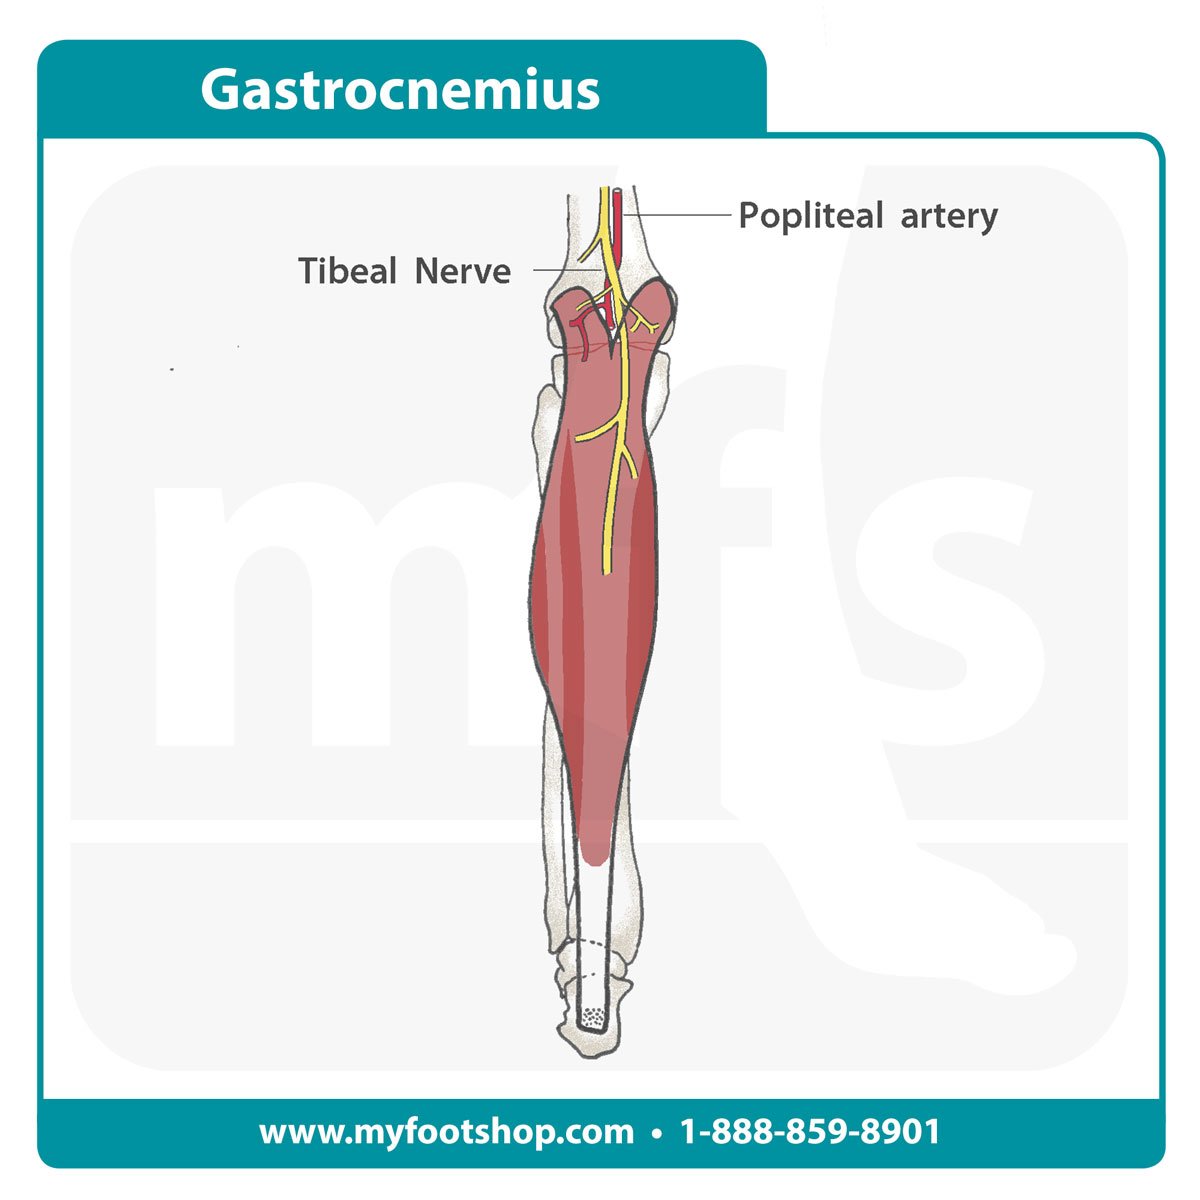 gastrocnemius muscle image